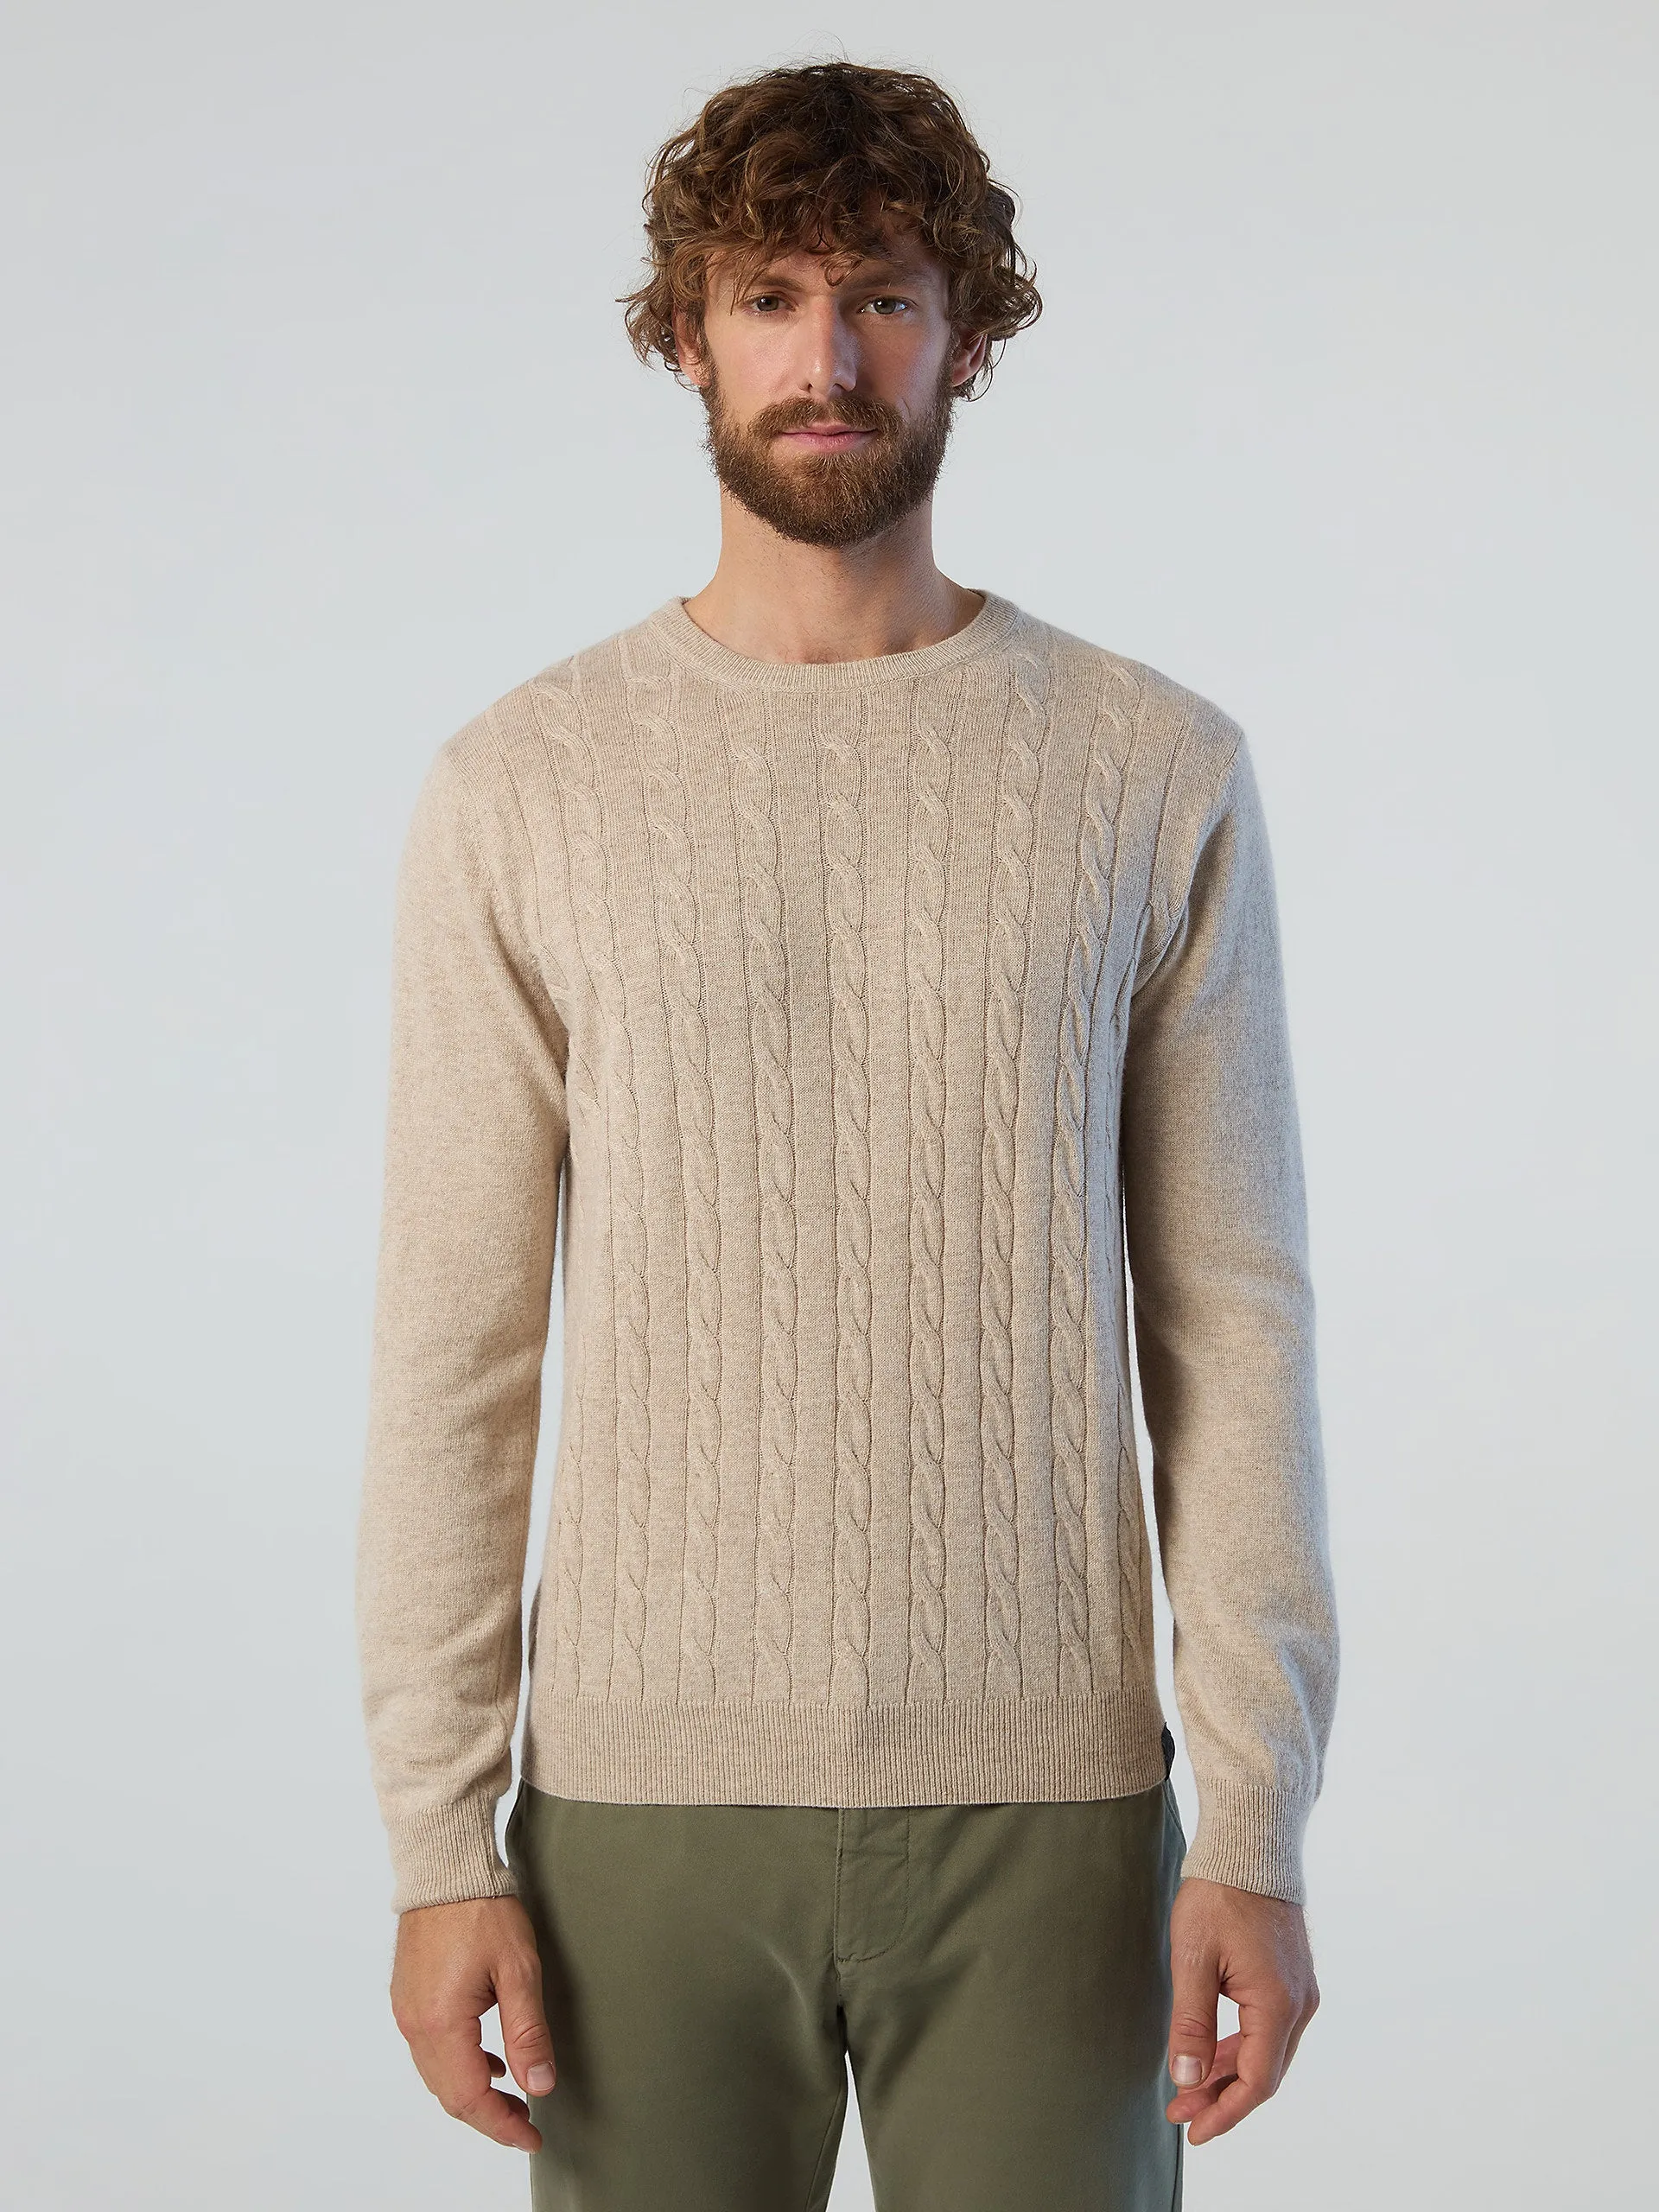  - Crew neck cable knitwearLight stoneL